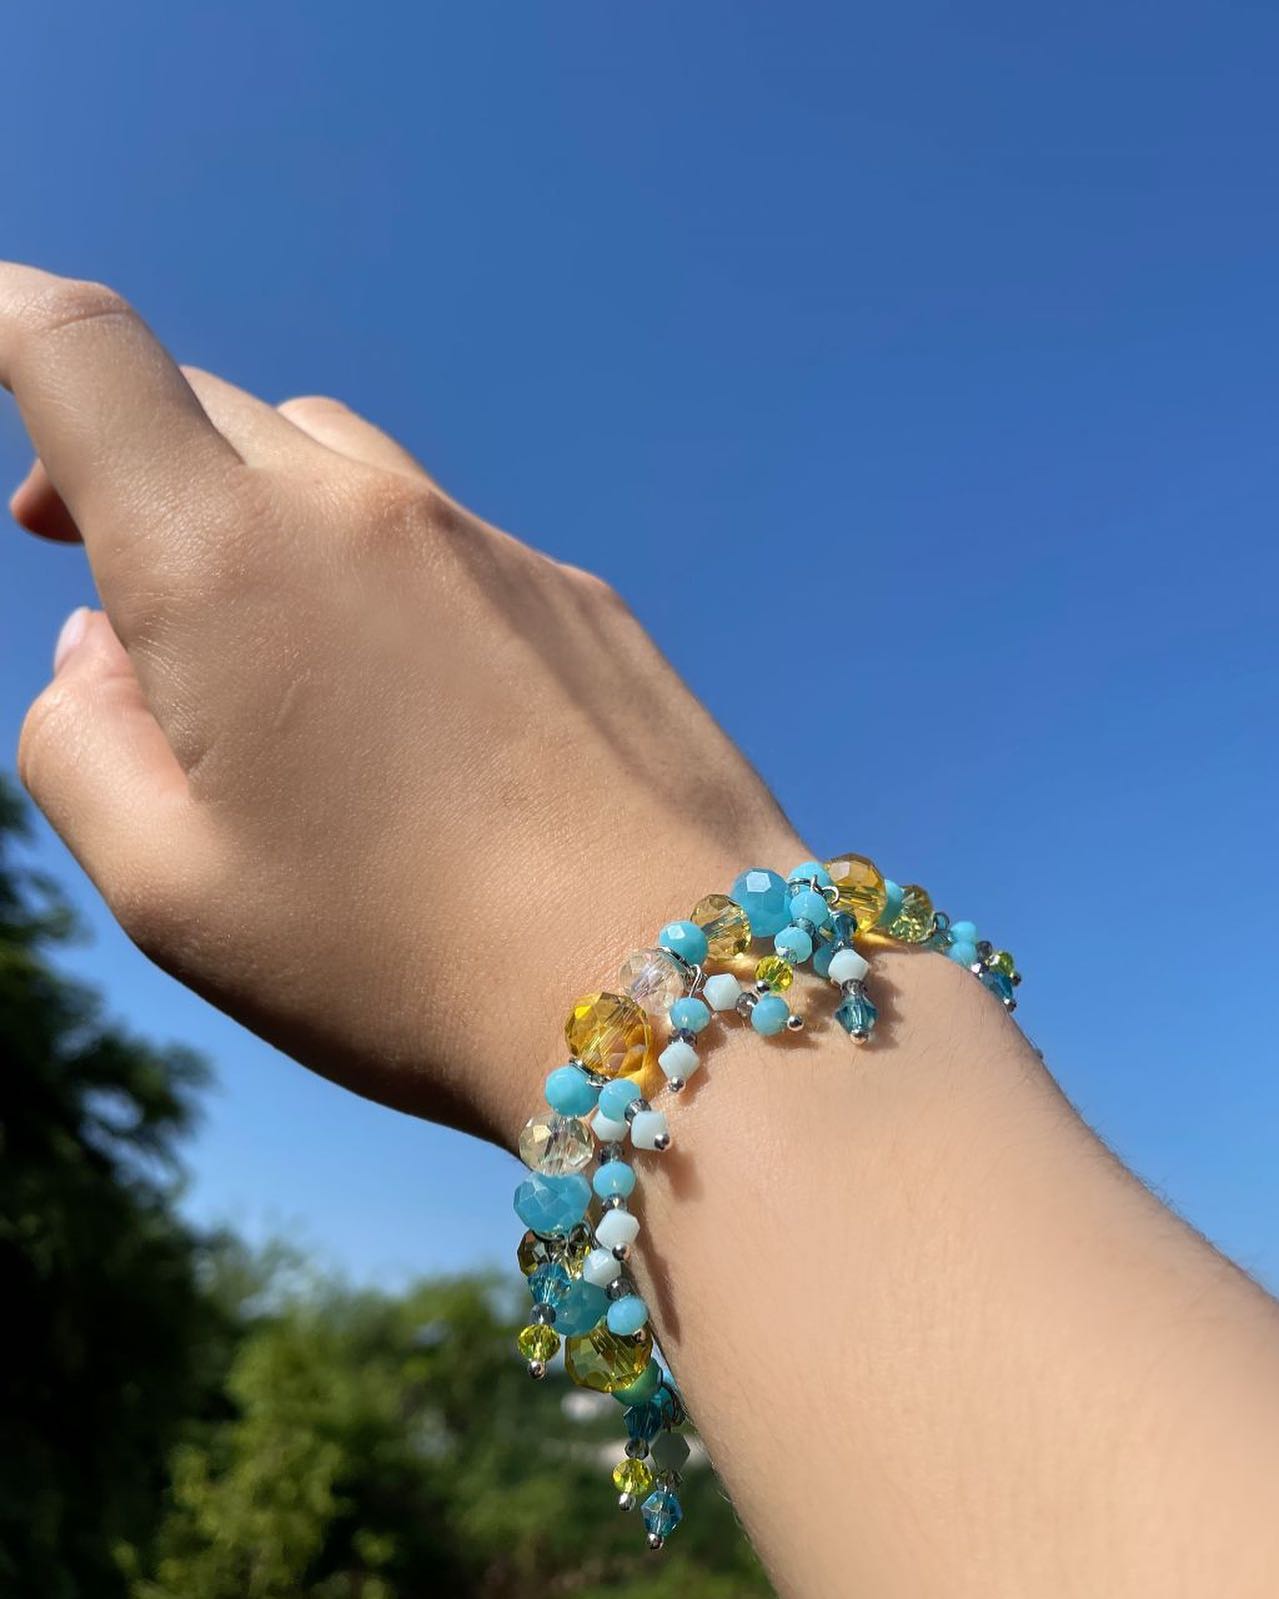 For the complete collection 🙂… 
Ring, earrings and bracelet made with love 💙💛 

#bracelets #handmadebracelets #yellowandblue #jewellery #yellowjewelry #creativeday #yellowthursday #creativebracelets #madeinswitzerland #handmadejewelry #swiss #blue #yellow #yellowjewelry #becreative #giftideas #giftideasforher #giftideaforgirls 

Follow
@handcrafts.ch 
@handcrafts.ch 
@handcrafts.ch